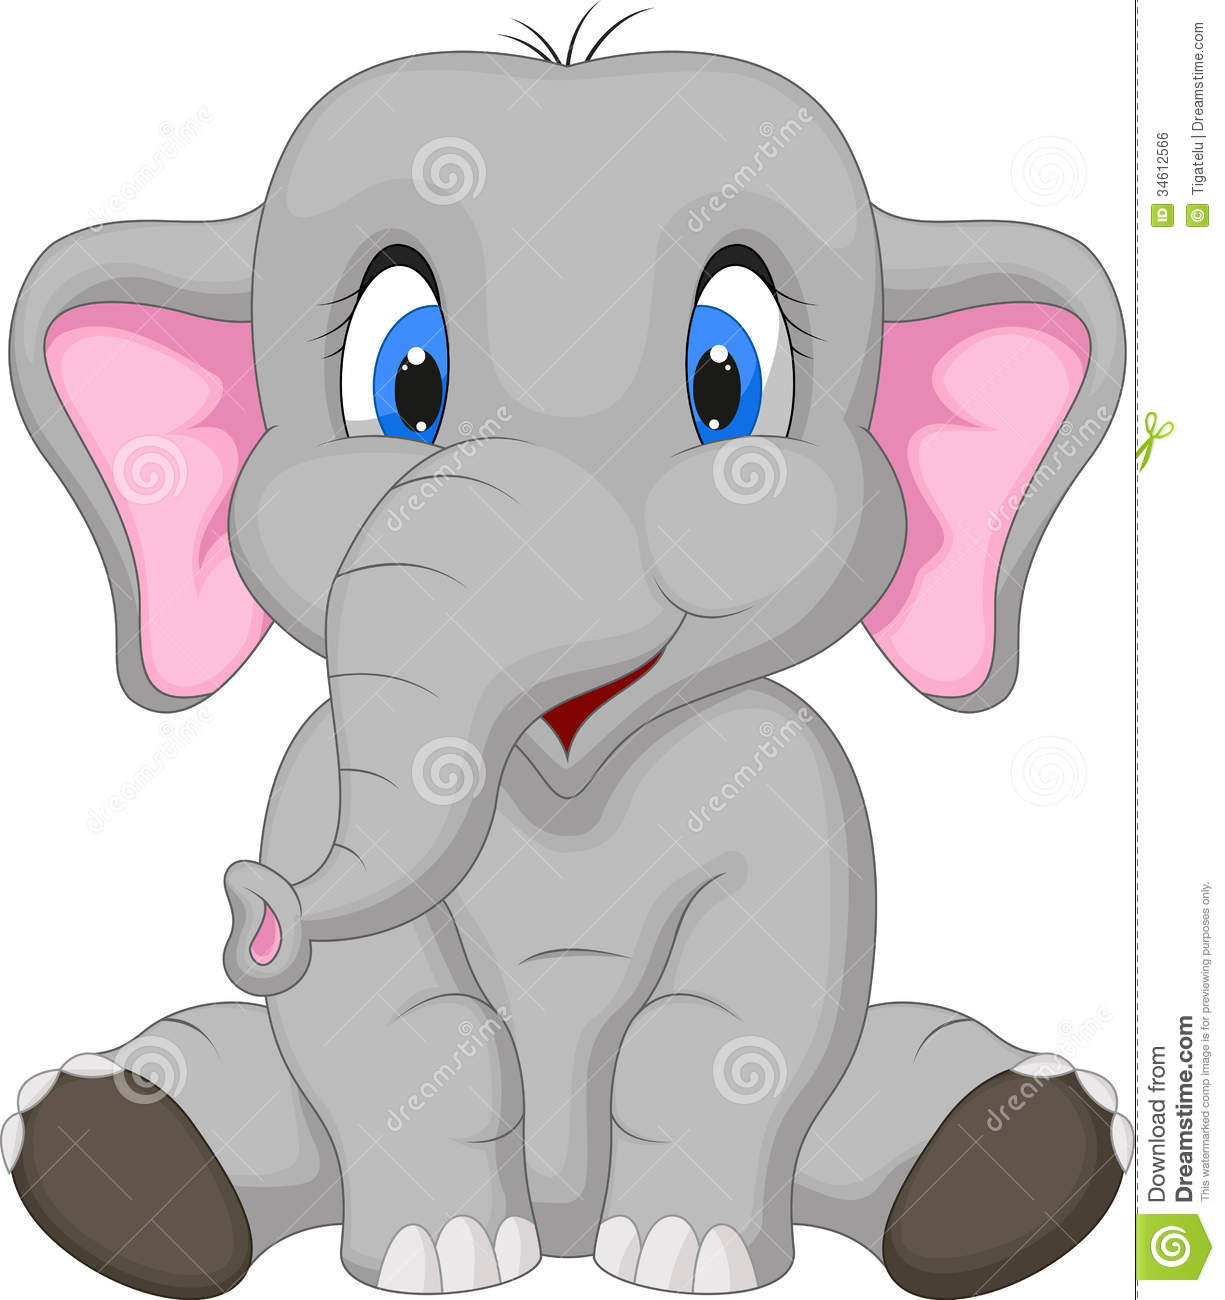 Cute Cartoon Elephants Image Pictures Becuo